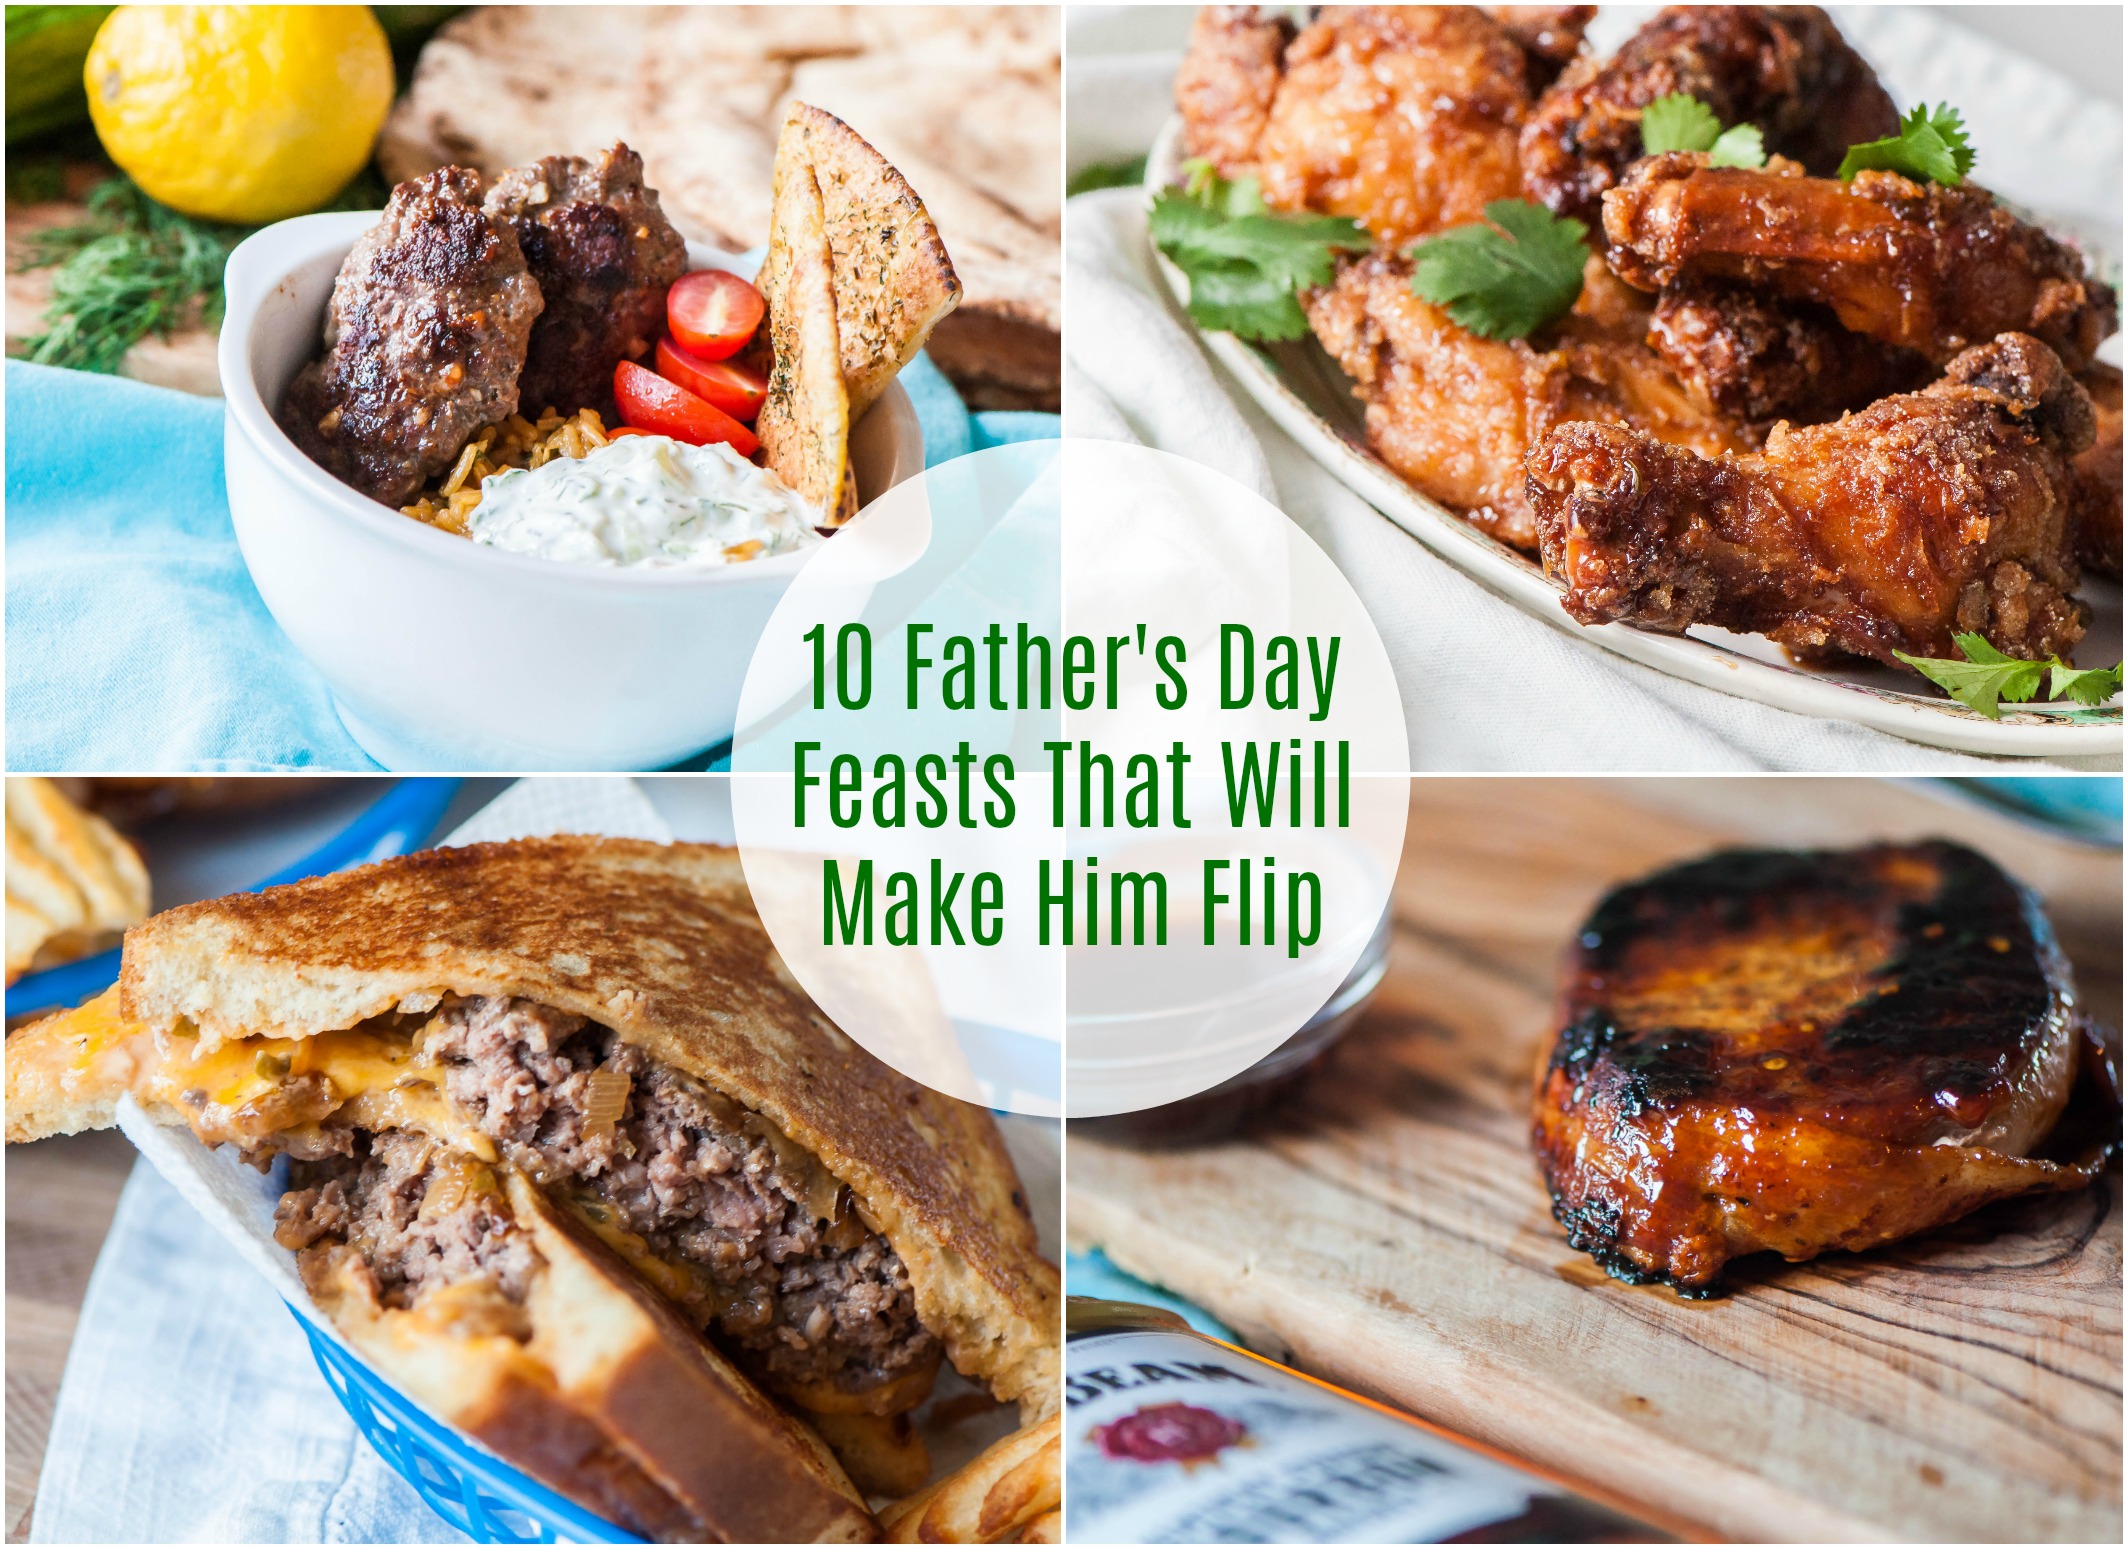 10 Father's Day Feasts That Will Make Him Flip